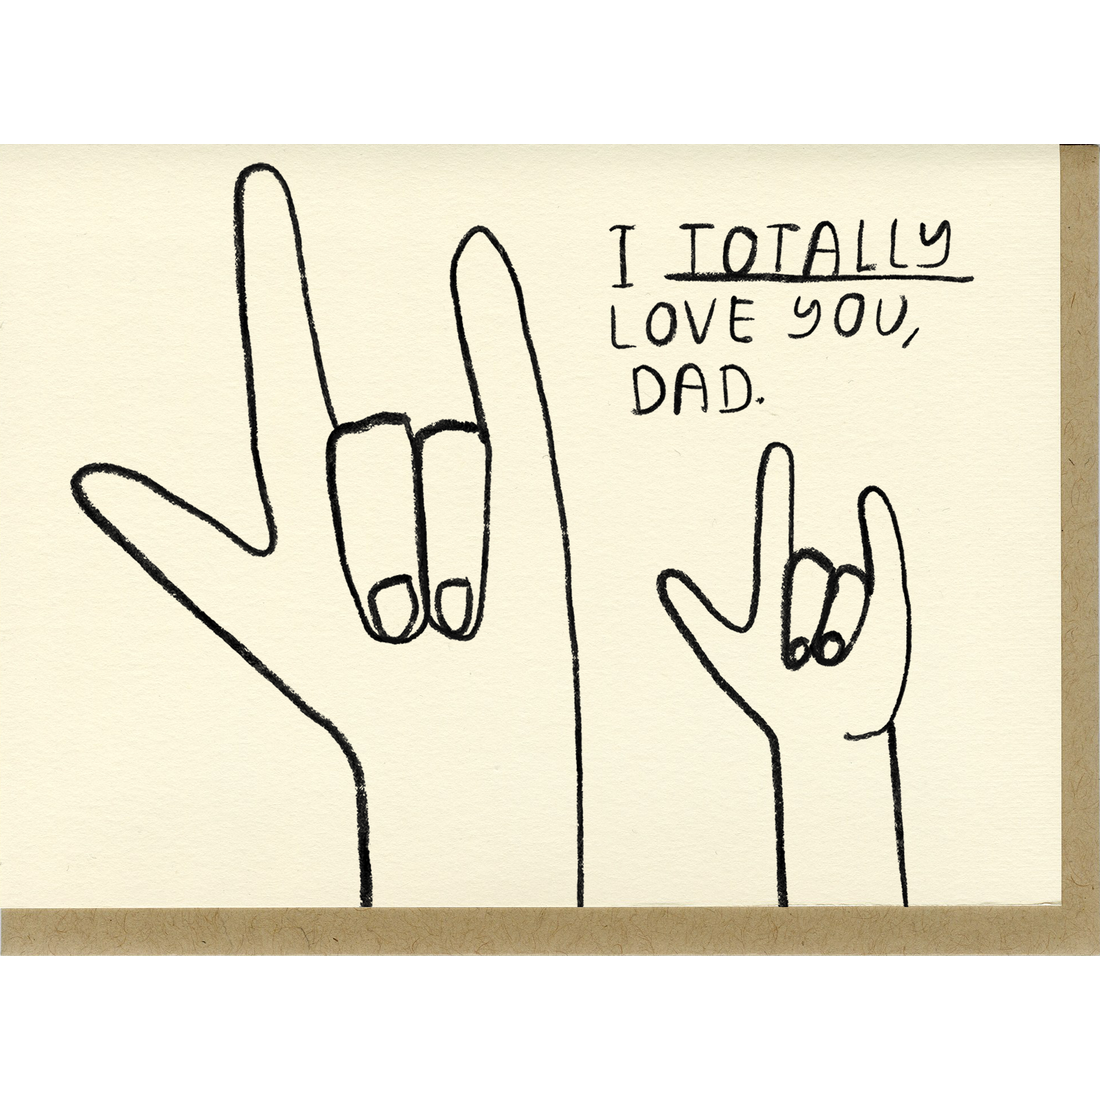 People I've Loved Greeting Card - Totally Love You, Dad